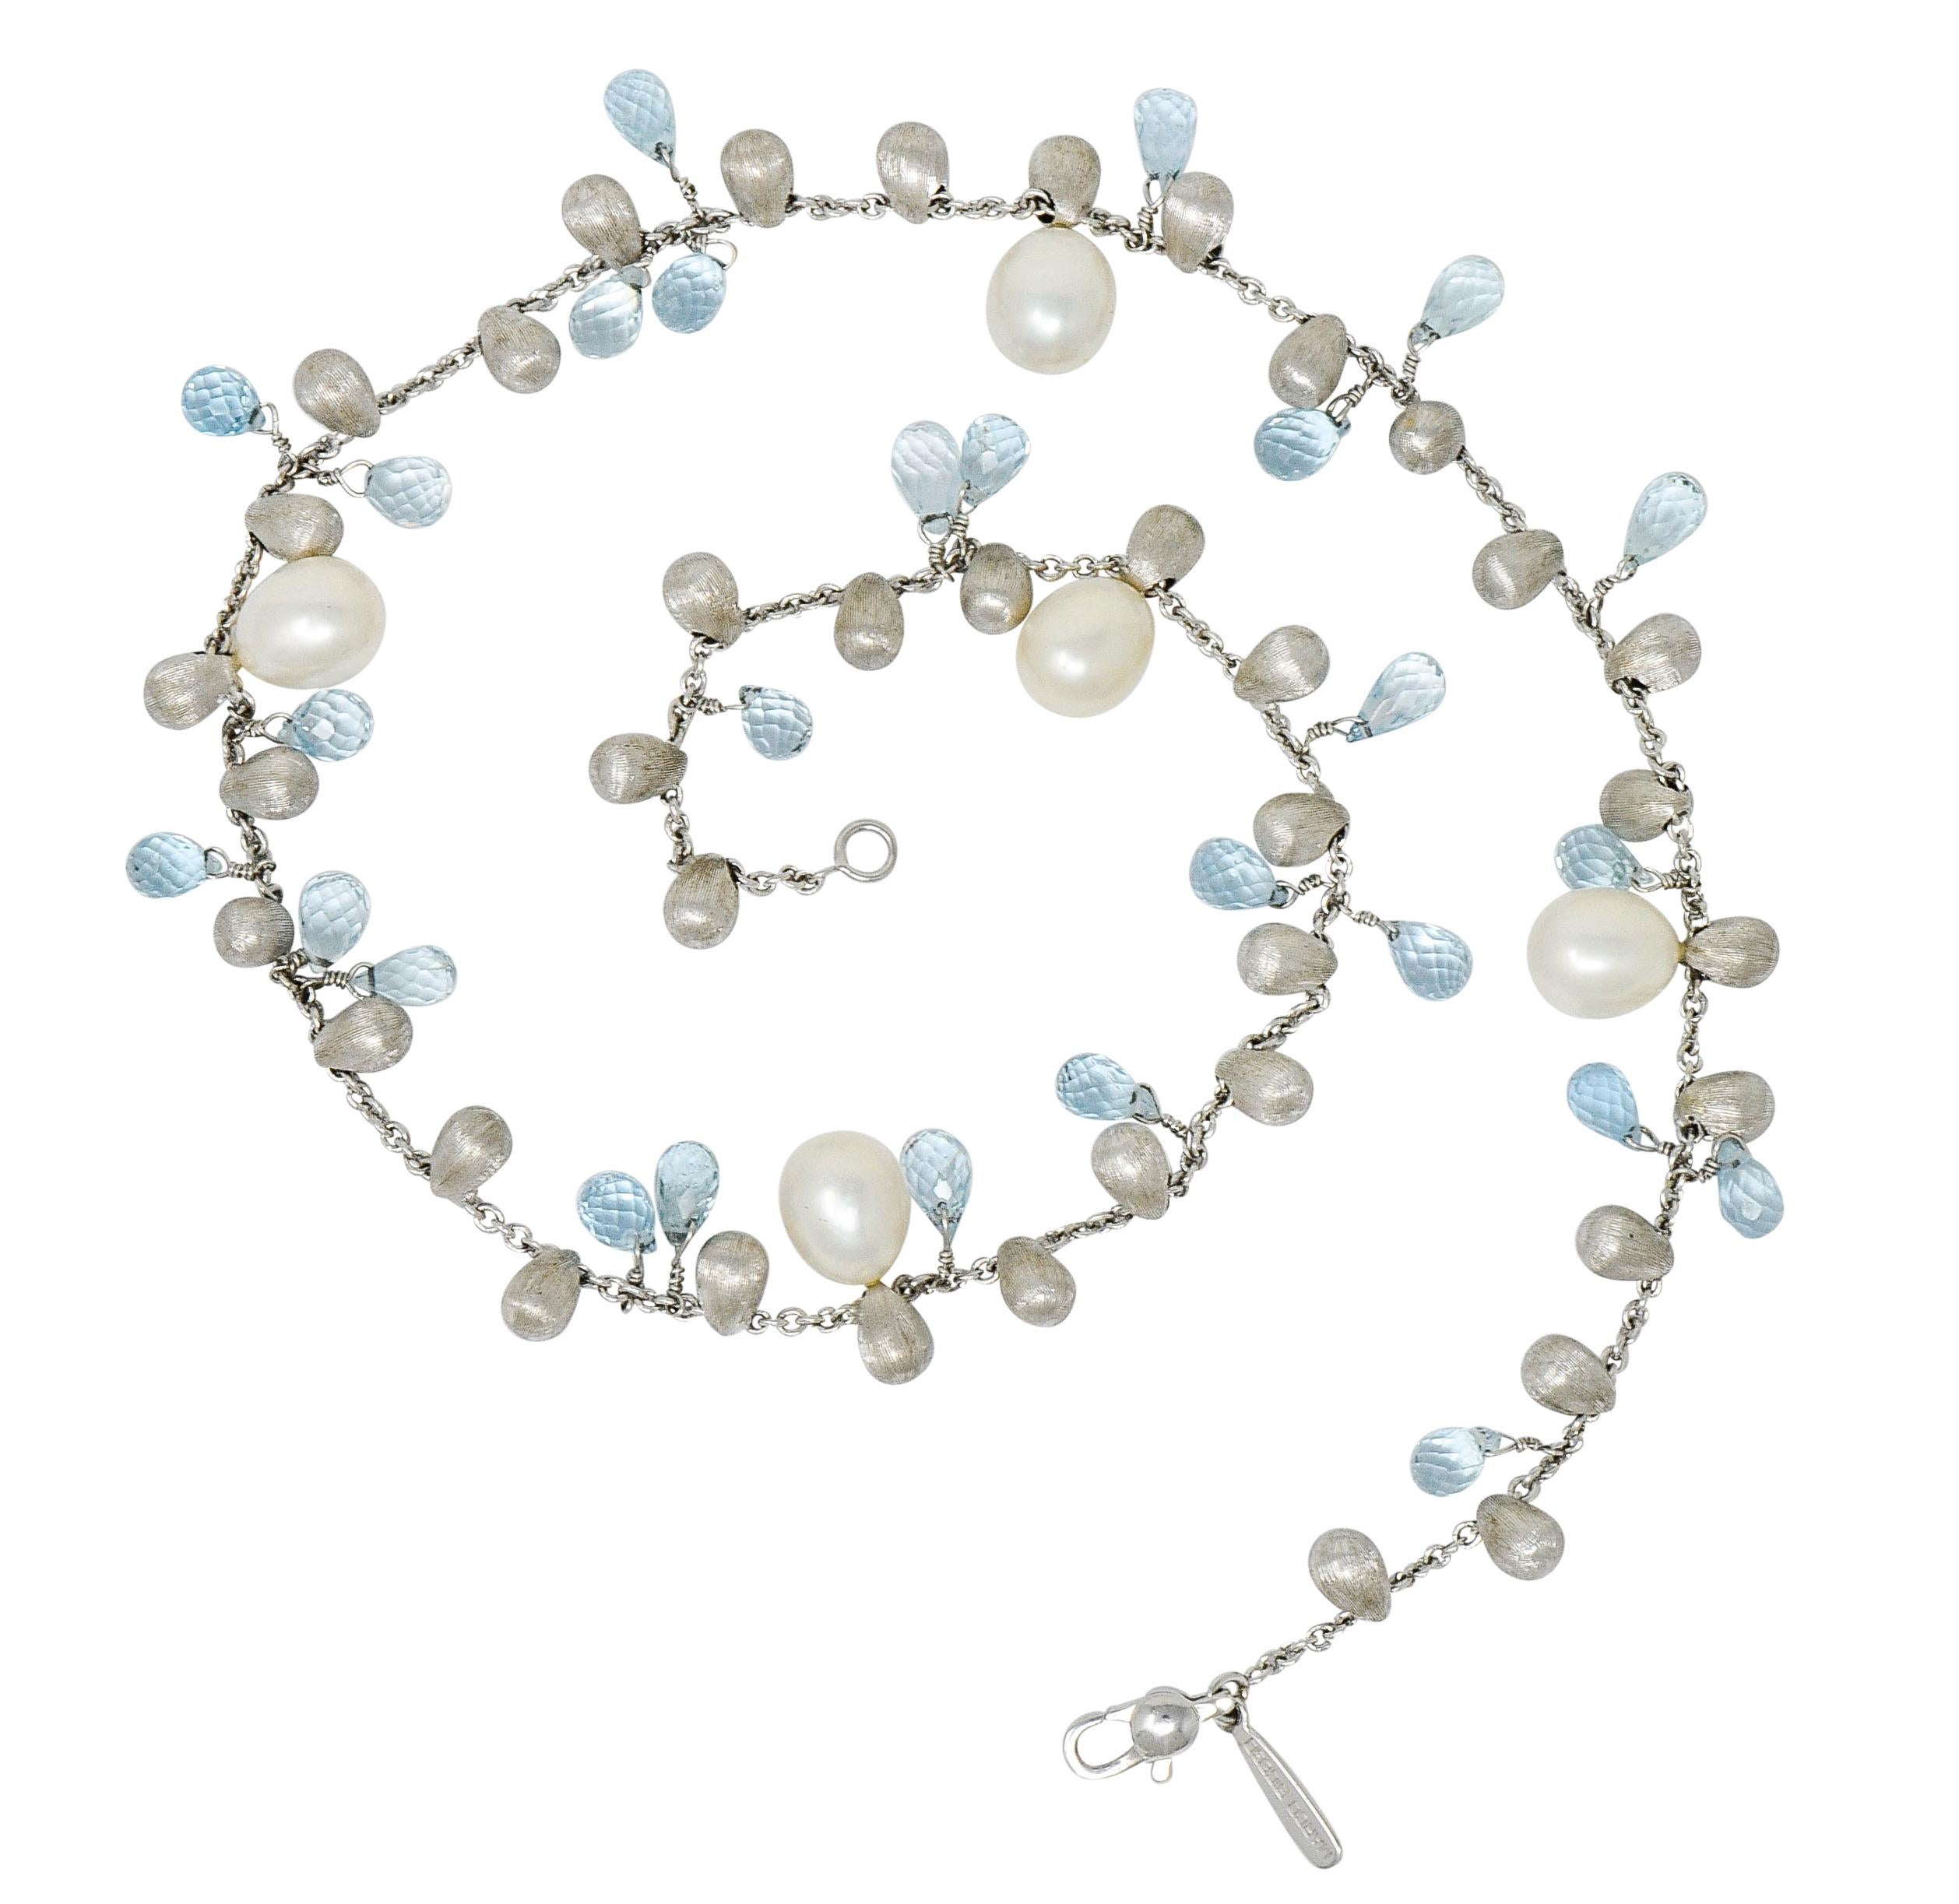 White gold cable chain necklace features pear shaped heavily brushed white gold drops alternating with briolette cut aquamarine

With five semi-baroque cultured pearl stations throughout measuring approximately 8.0 x 9.5 mm; white in body color with